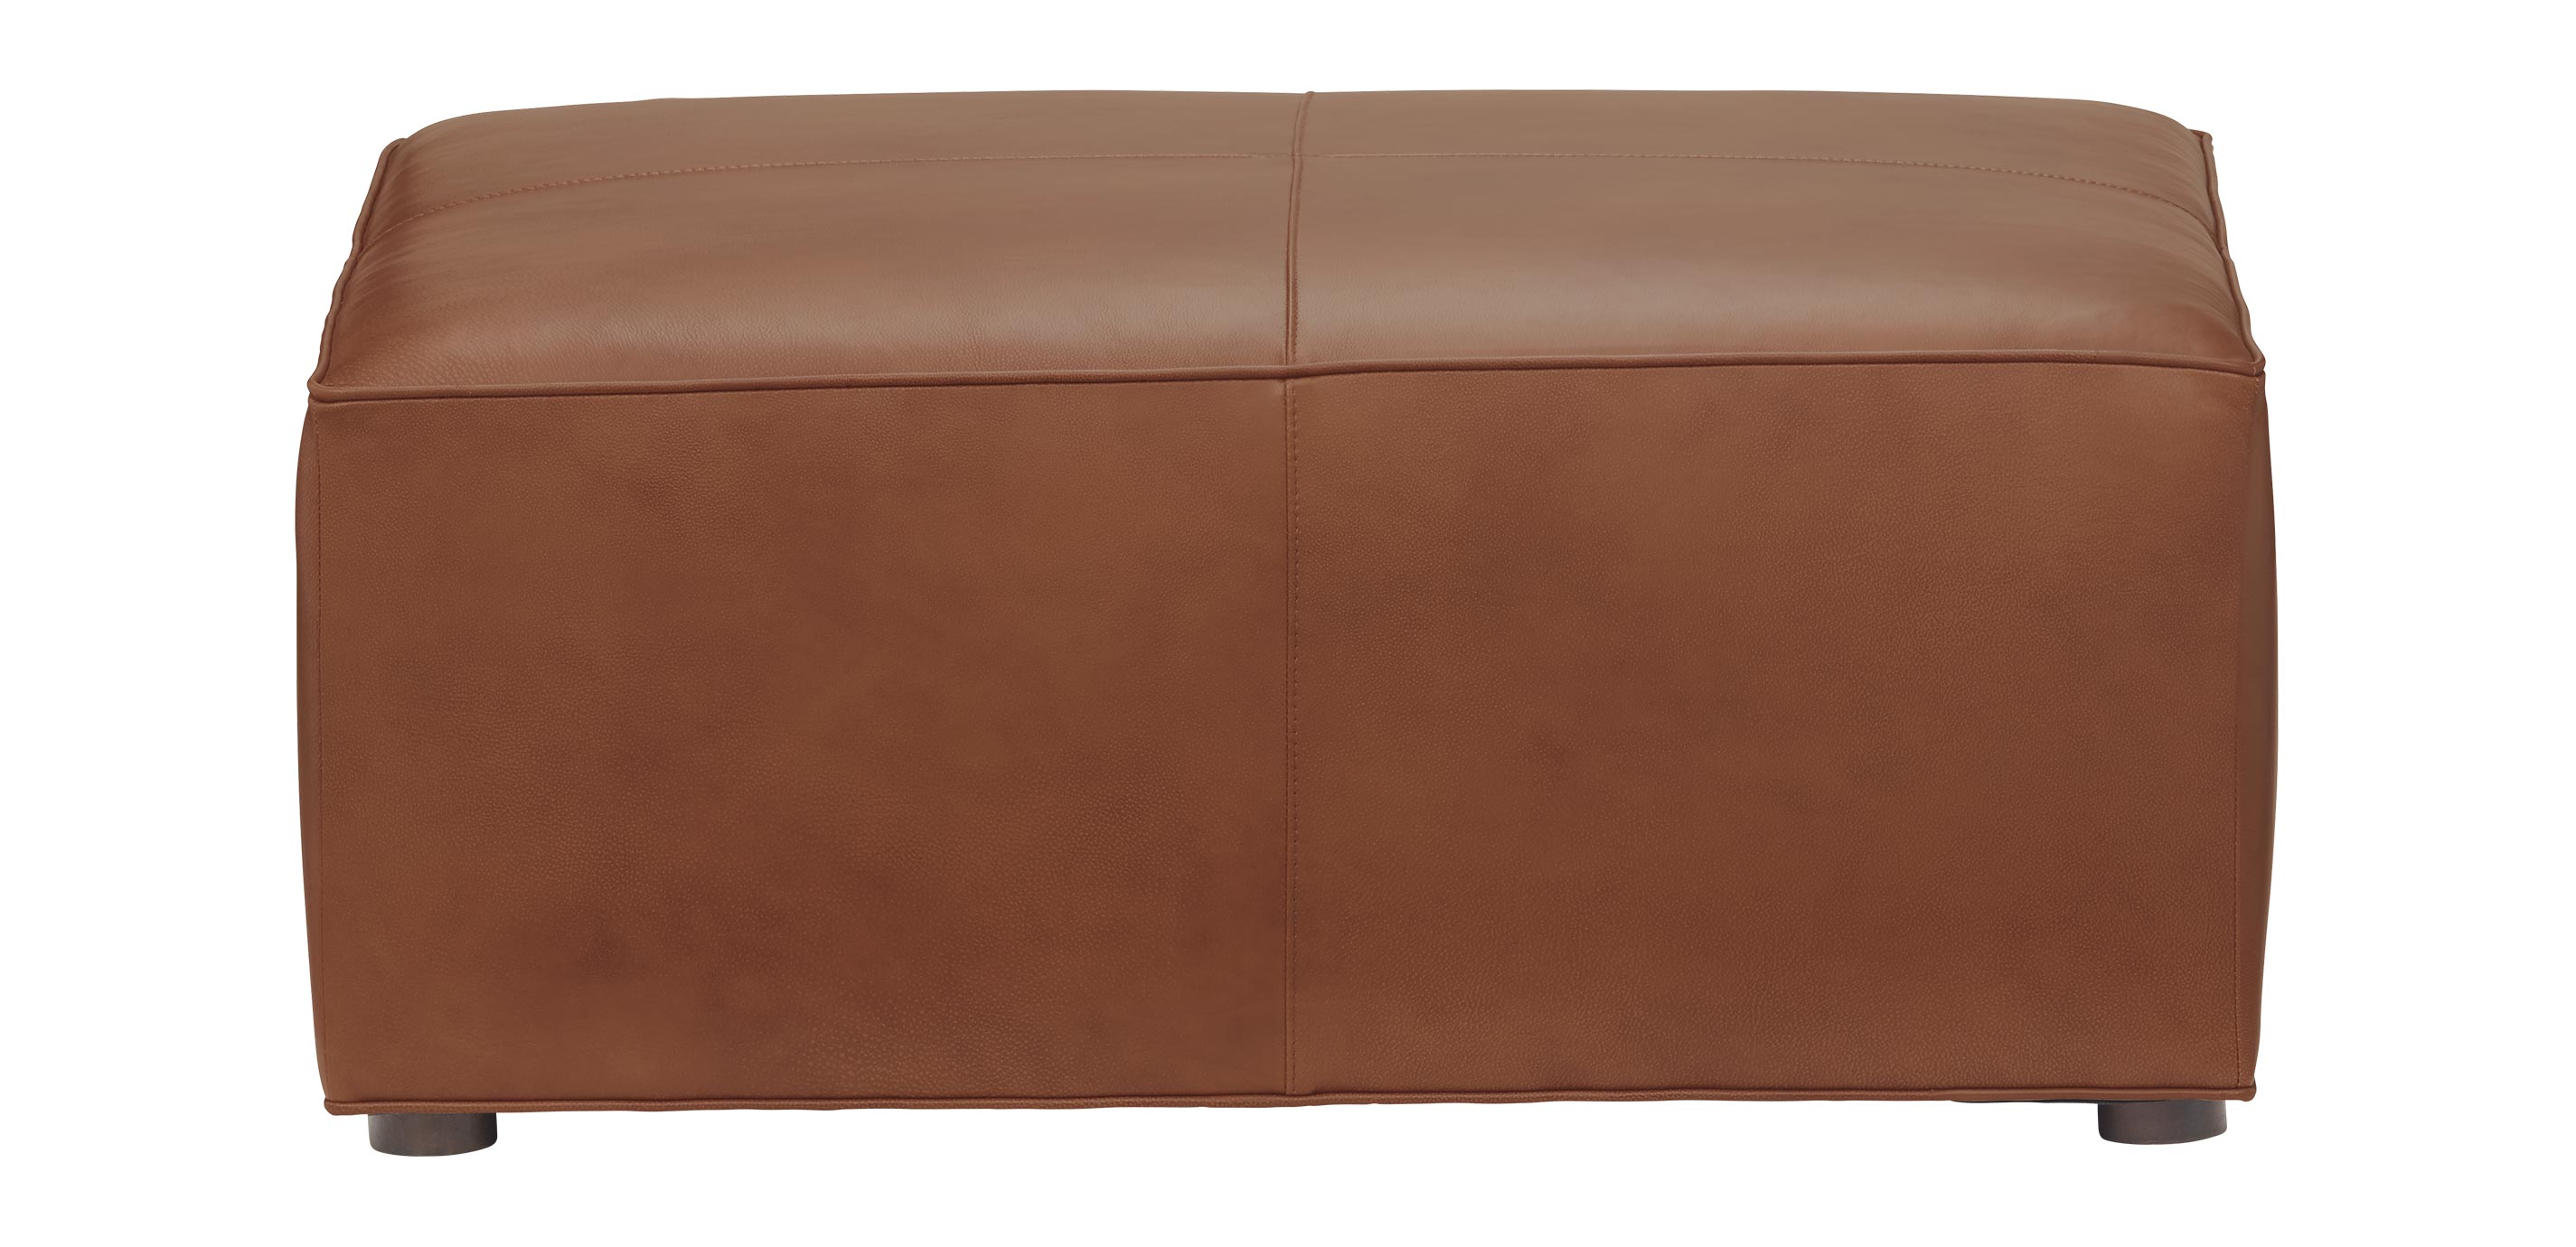 Bryne Leather Square Ottoman, Large Square Leather Ottoman